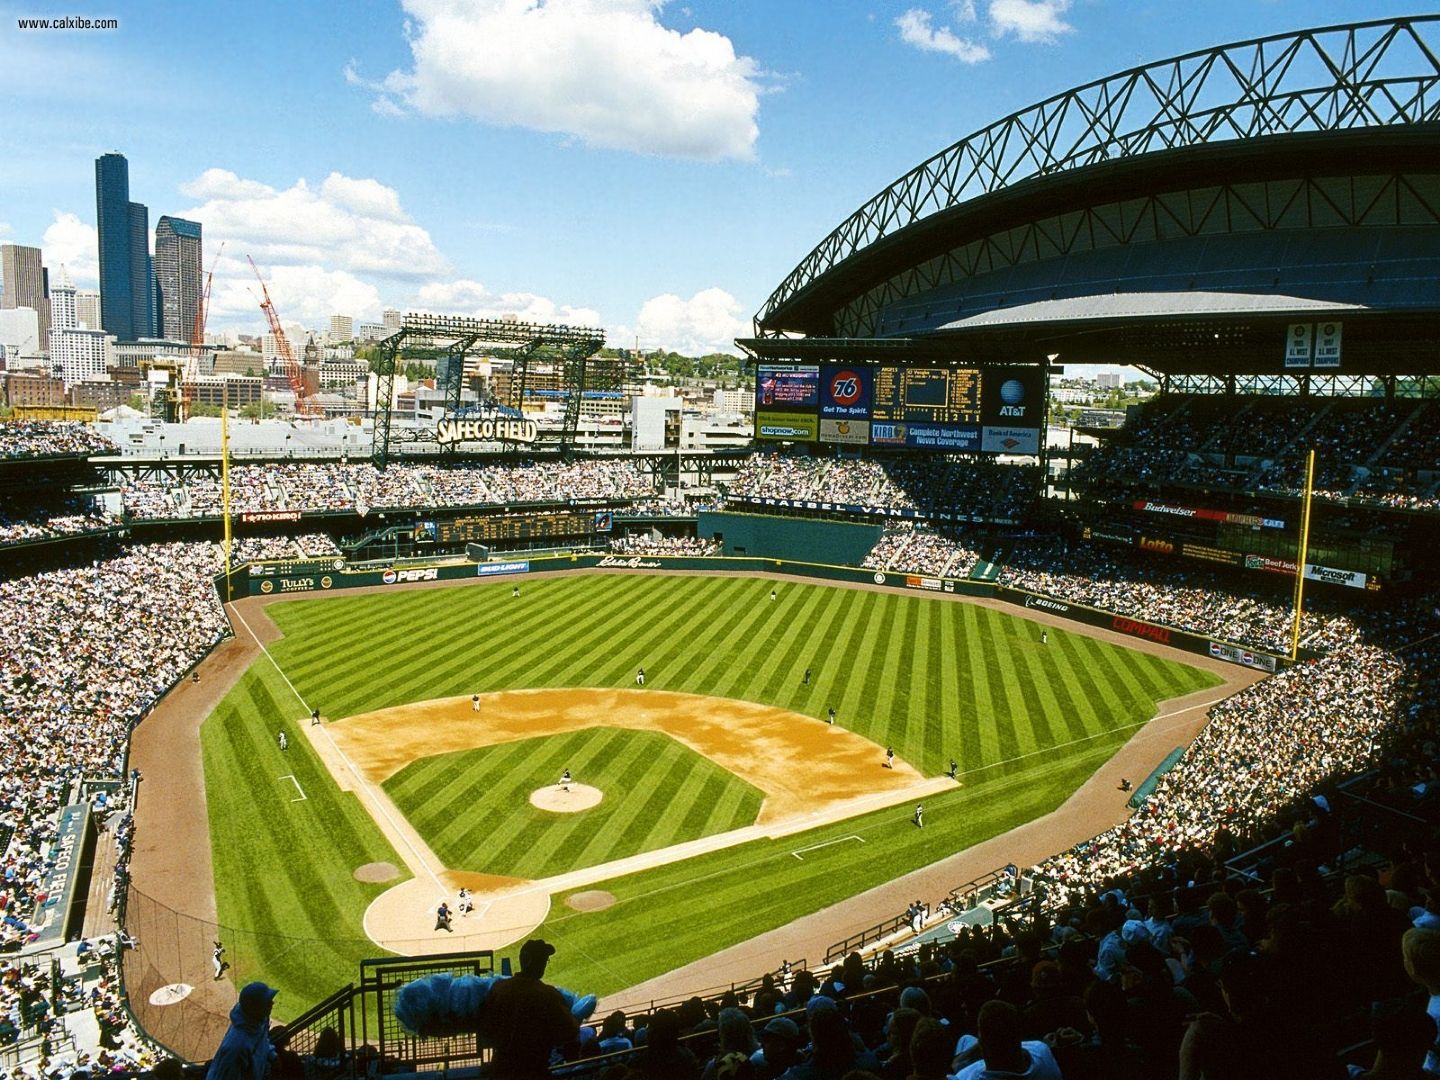 Seattle Mariners Wallpaper Background